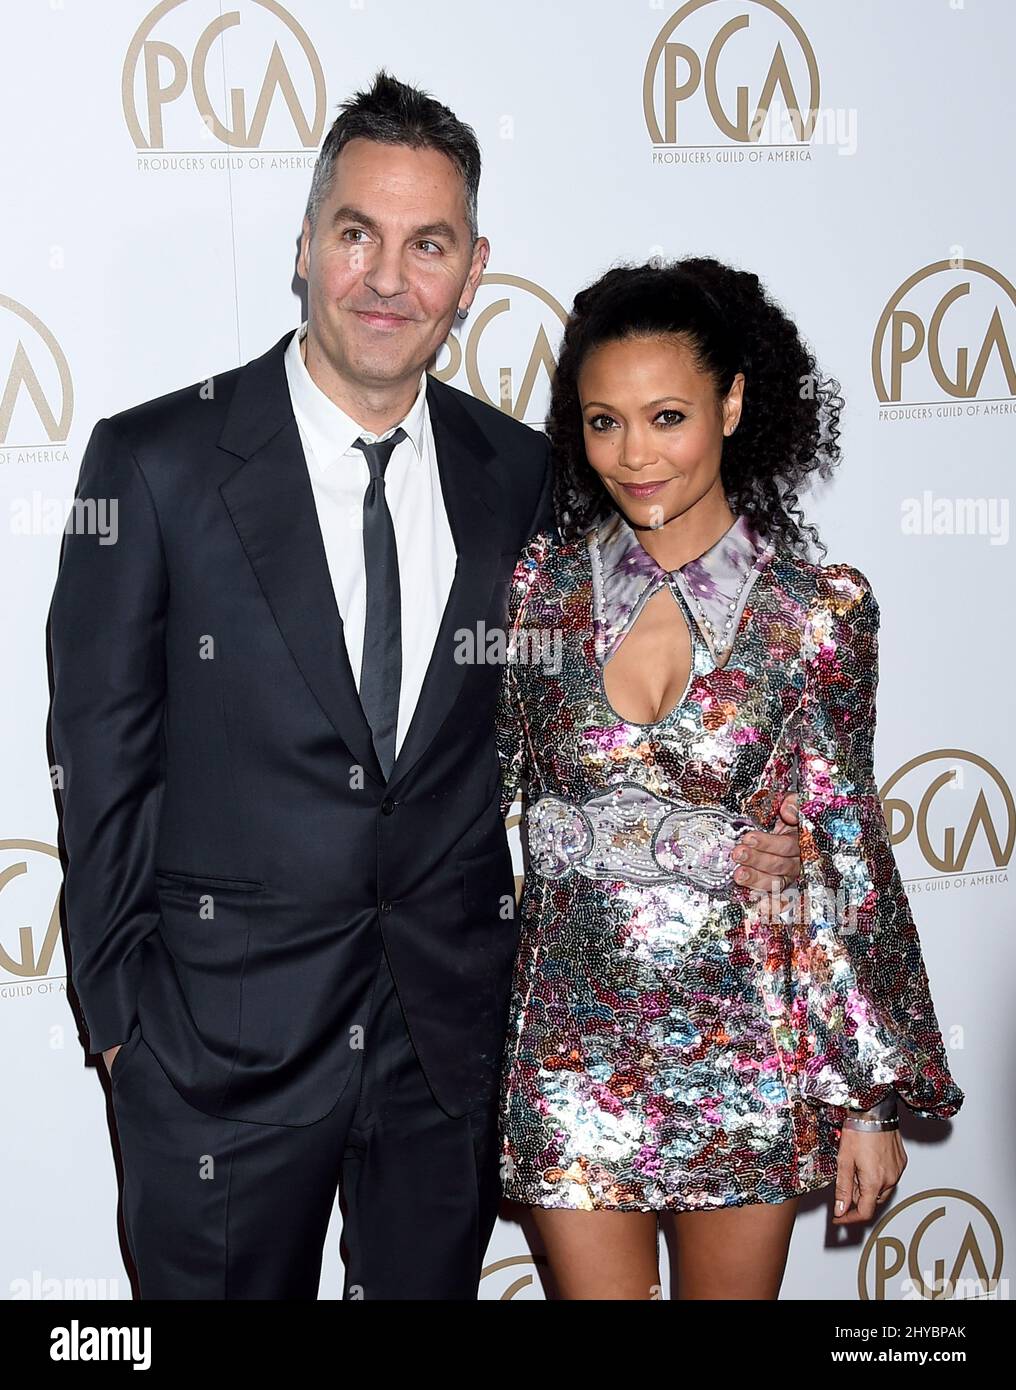 Thandie Newton and Ol Parker attending the 28th Annual Producers Guild Awards held at the Beverly Hilton Hotel Stock Photo